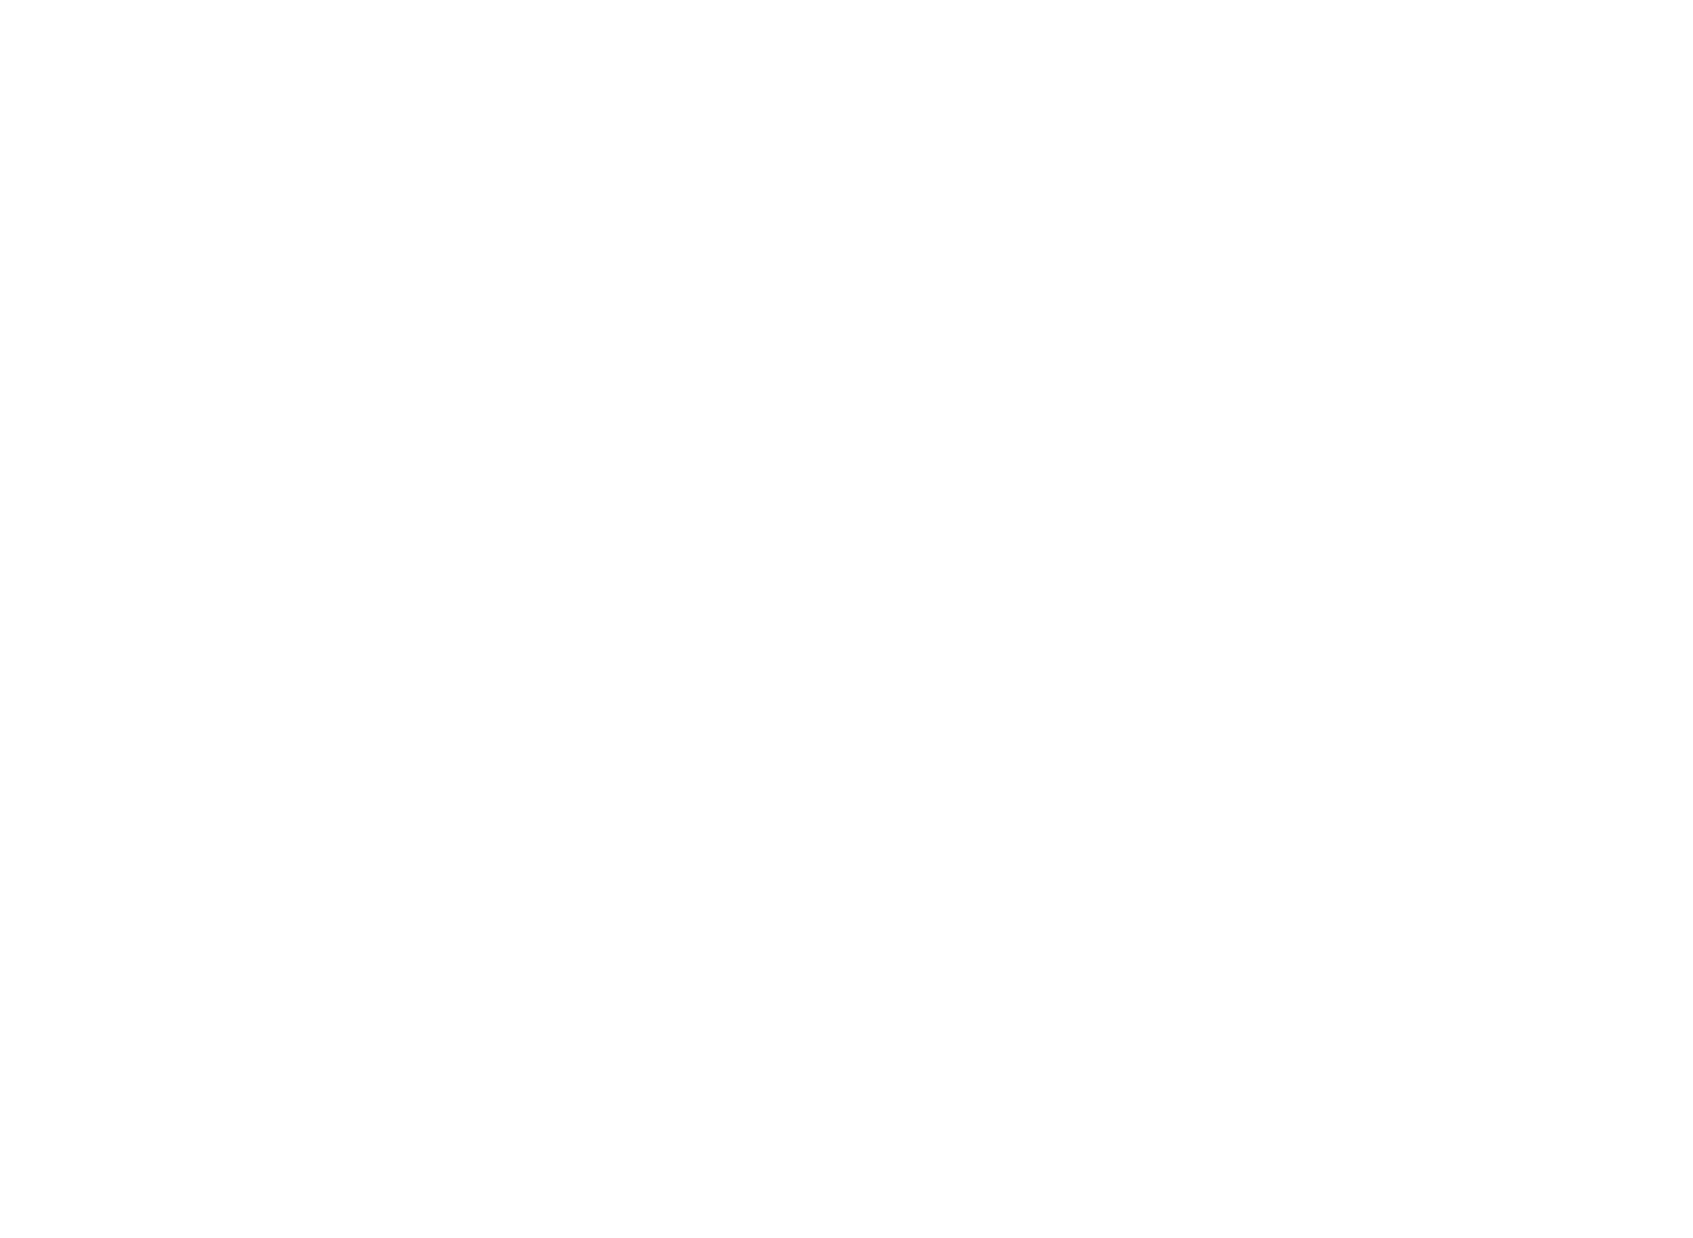 Qualified Member Personal Finance Soiciety